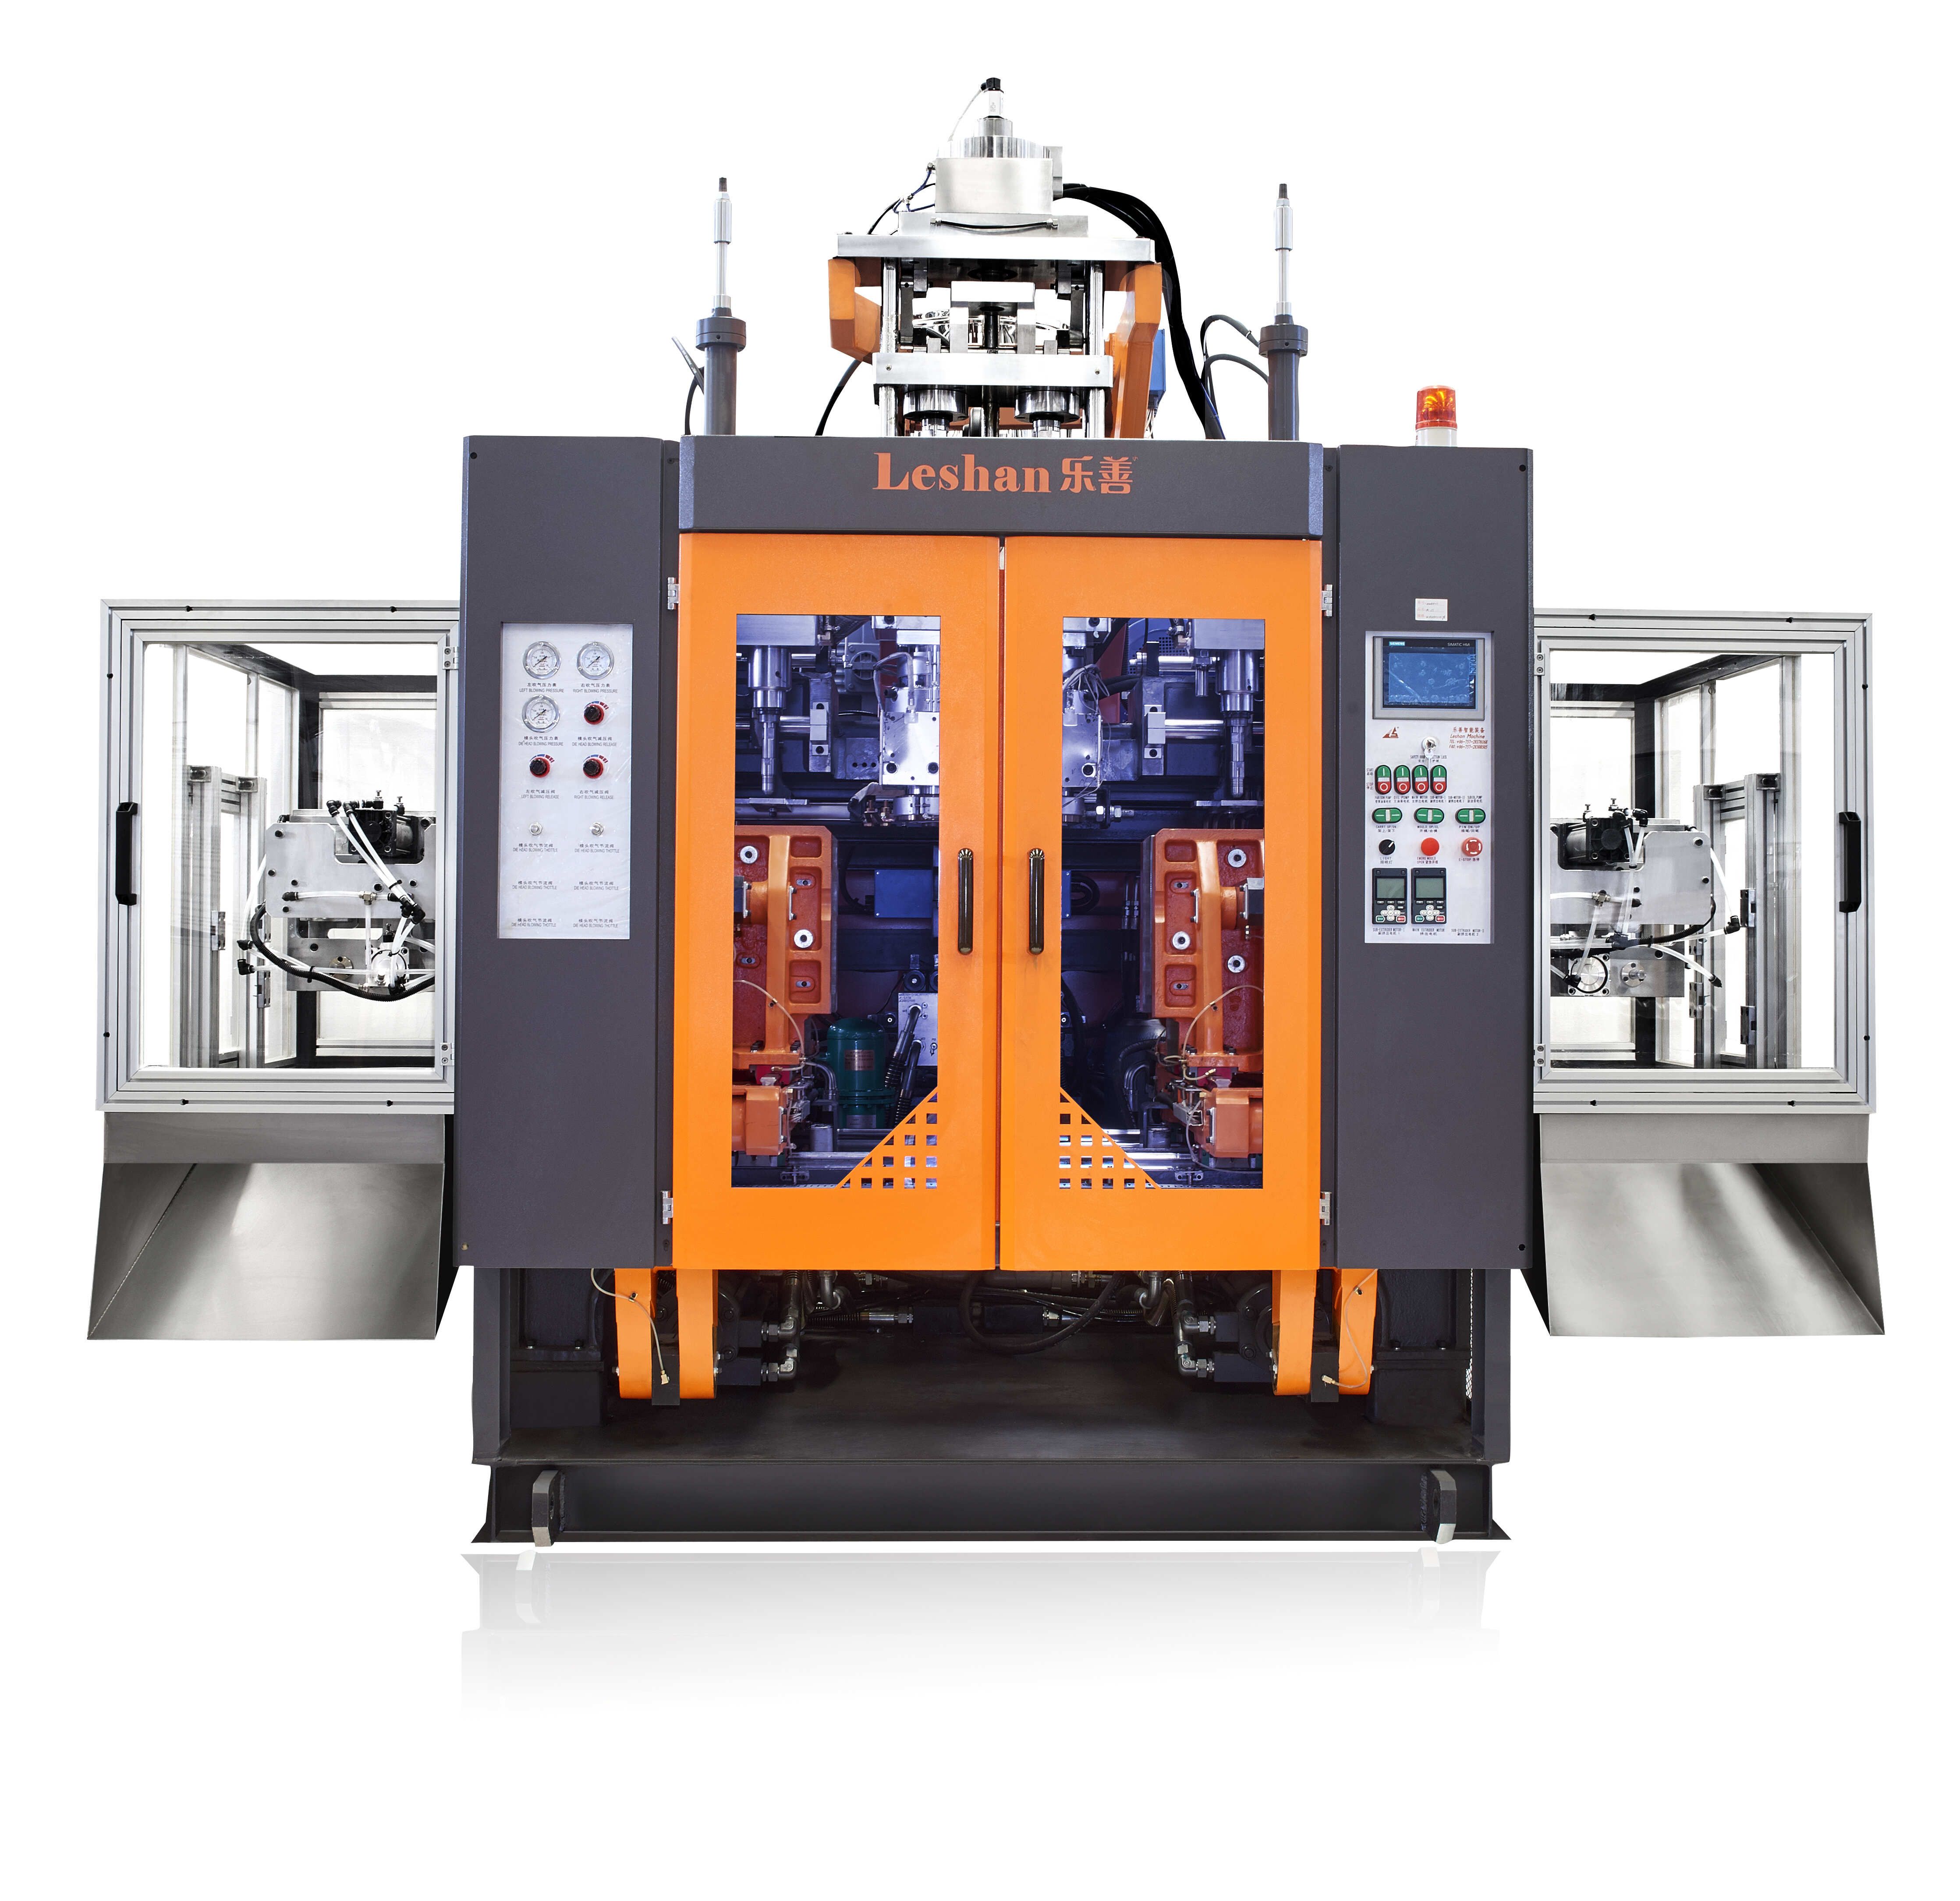 What is the cost composition of automatic blowing mold machine?